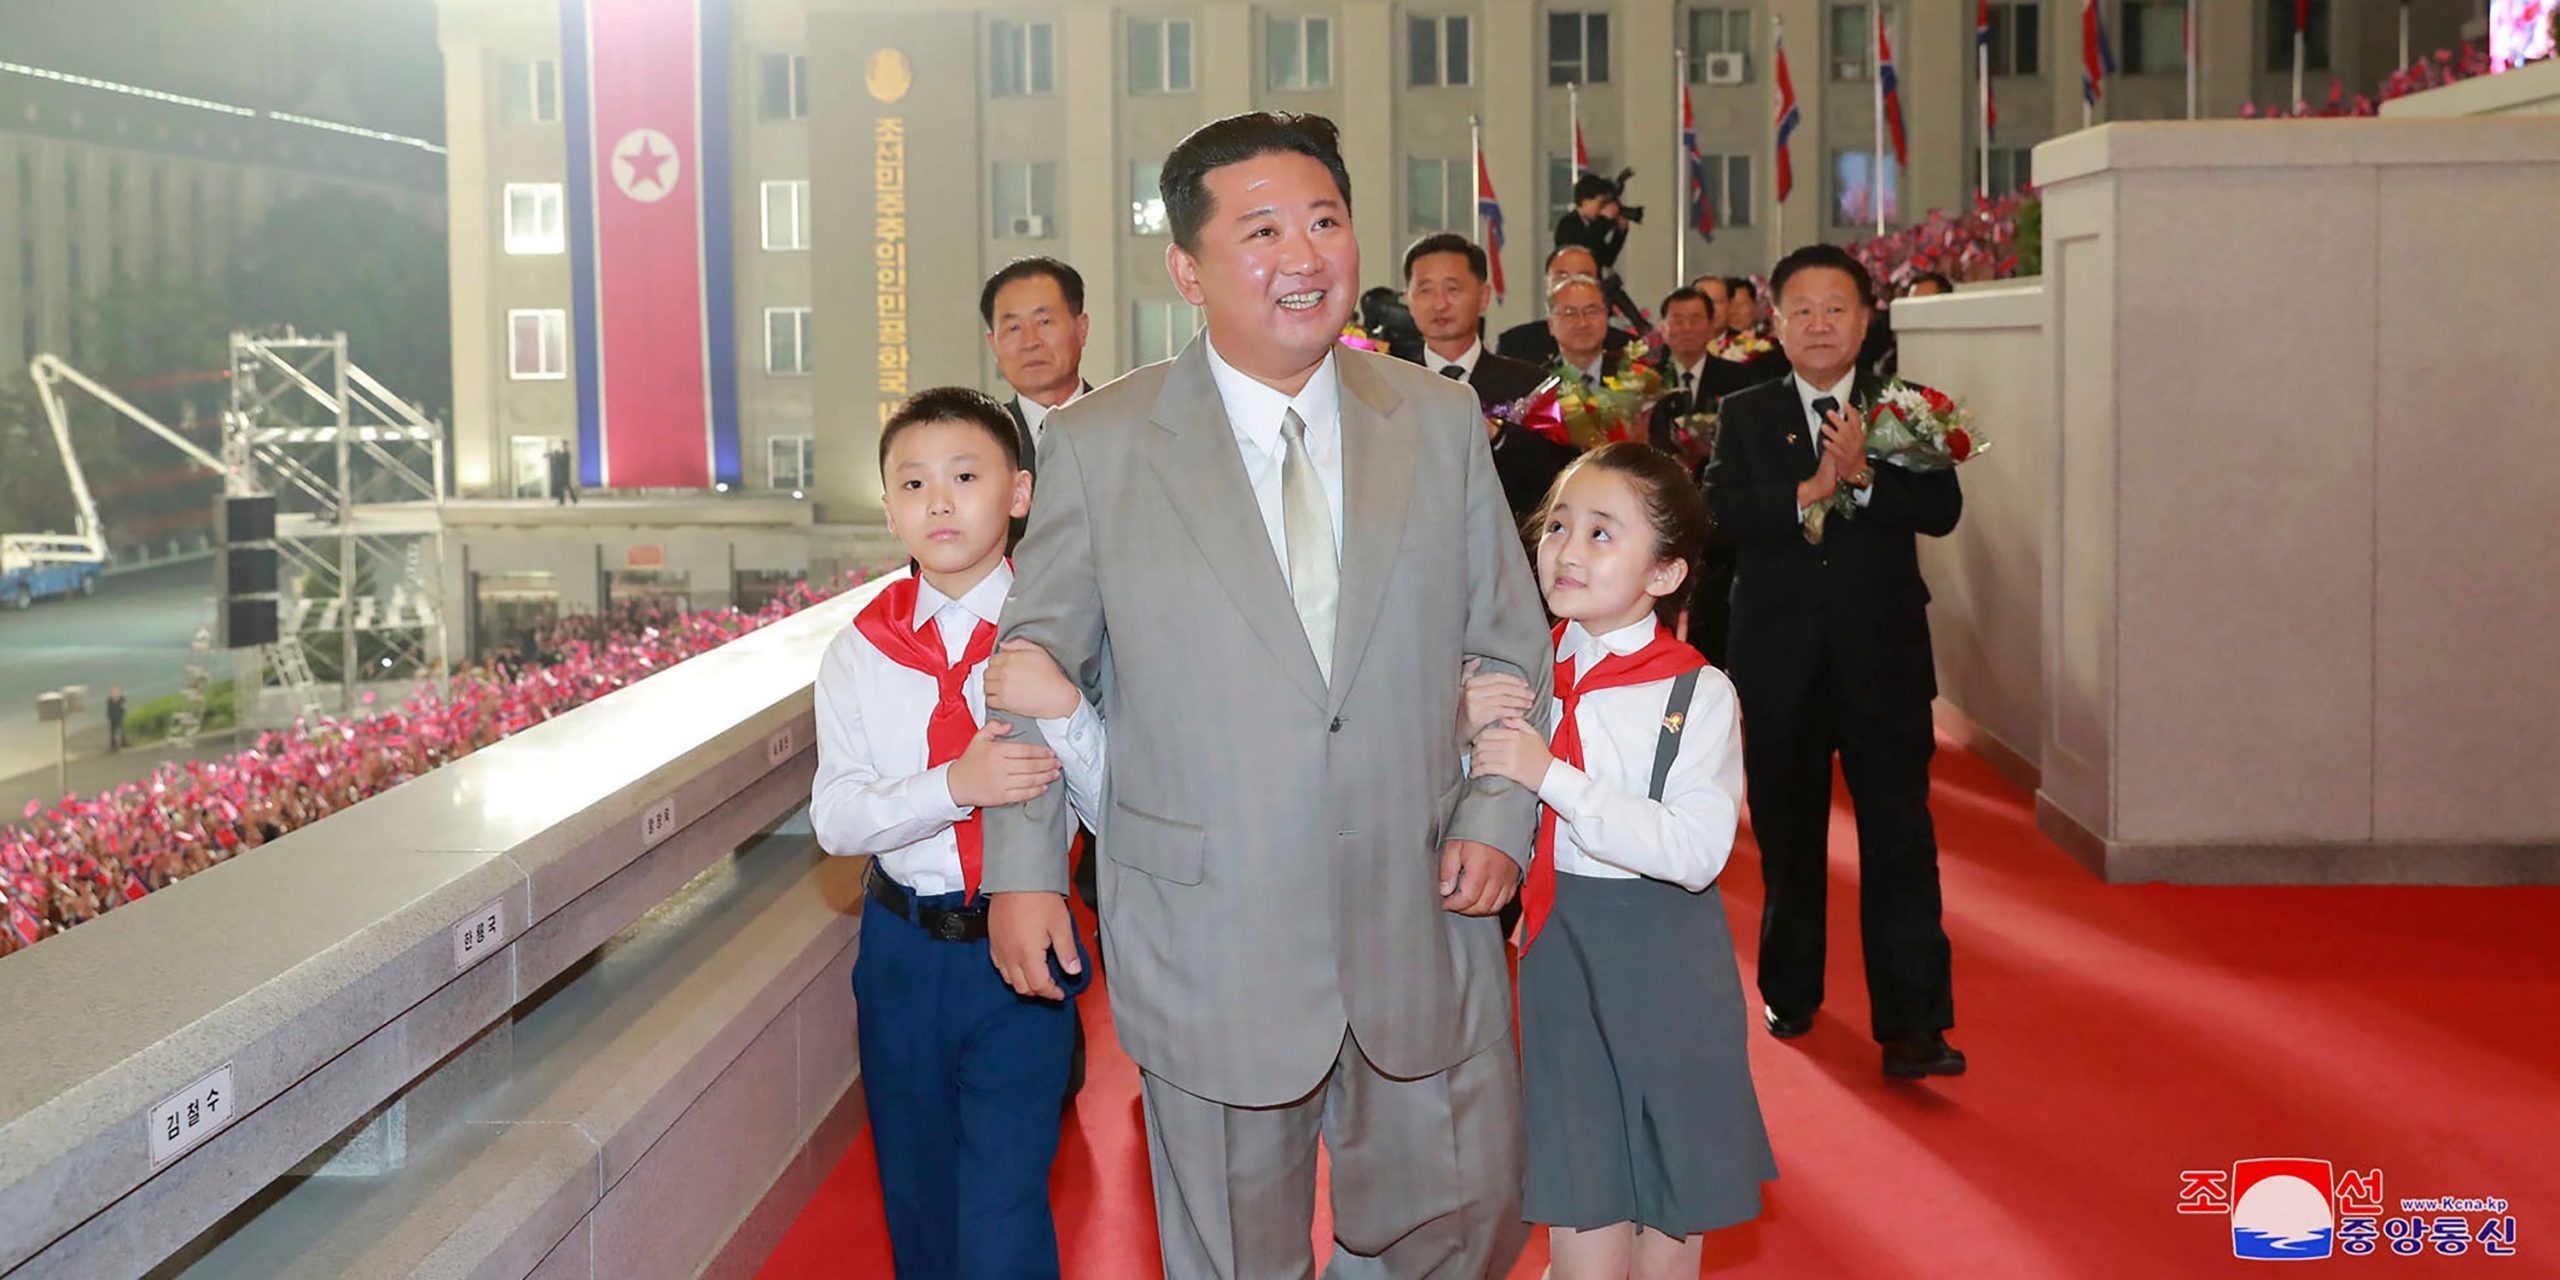 In this photo provided by the North Korean government, North Korean leader Kim Jong Un walks with children during a celebration of the nation’s 73rd anniversary at Kim Il Sung Square in Pyongyang, North Korea, early Thursday, Sept. 9, 2021. Independent journalists were not given access to cover the event depicted in this image distributed by the North Korean government. The content of this image is as provided and cannot be independently verified. Korean language watermark on image as provided by source reads: "KCNA" which is the abbreviation for Korean Central News Agency.